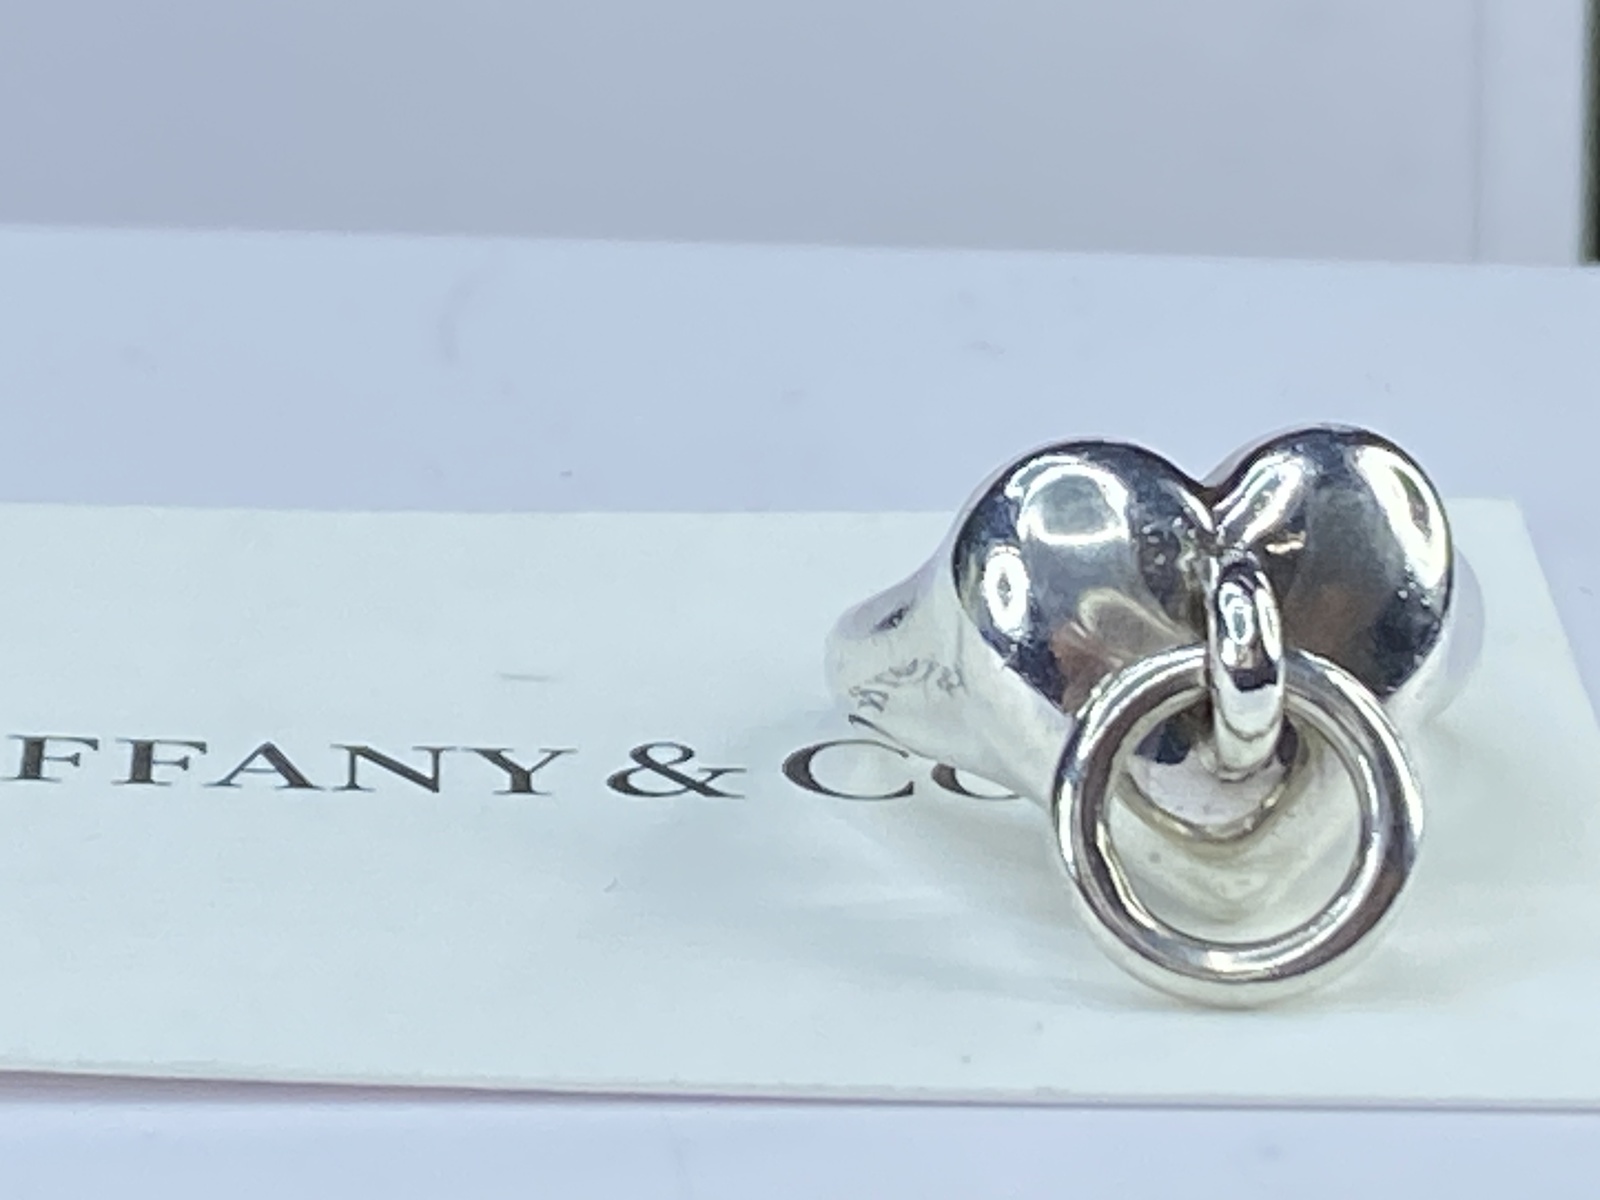  TIFFANY & Co.1995 Heart Knock sterling silver 925 pinky ring 7.1g s4.5 JR7869  - $139.00